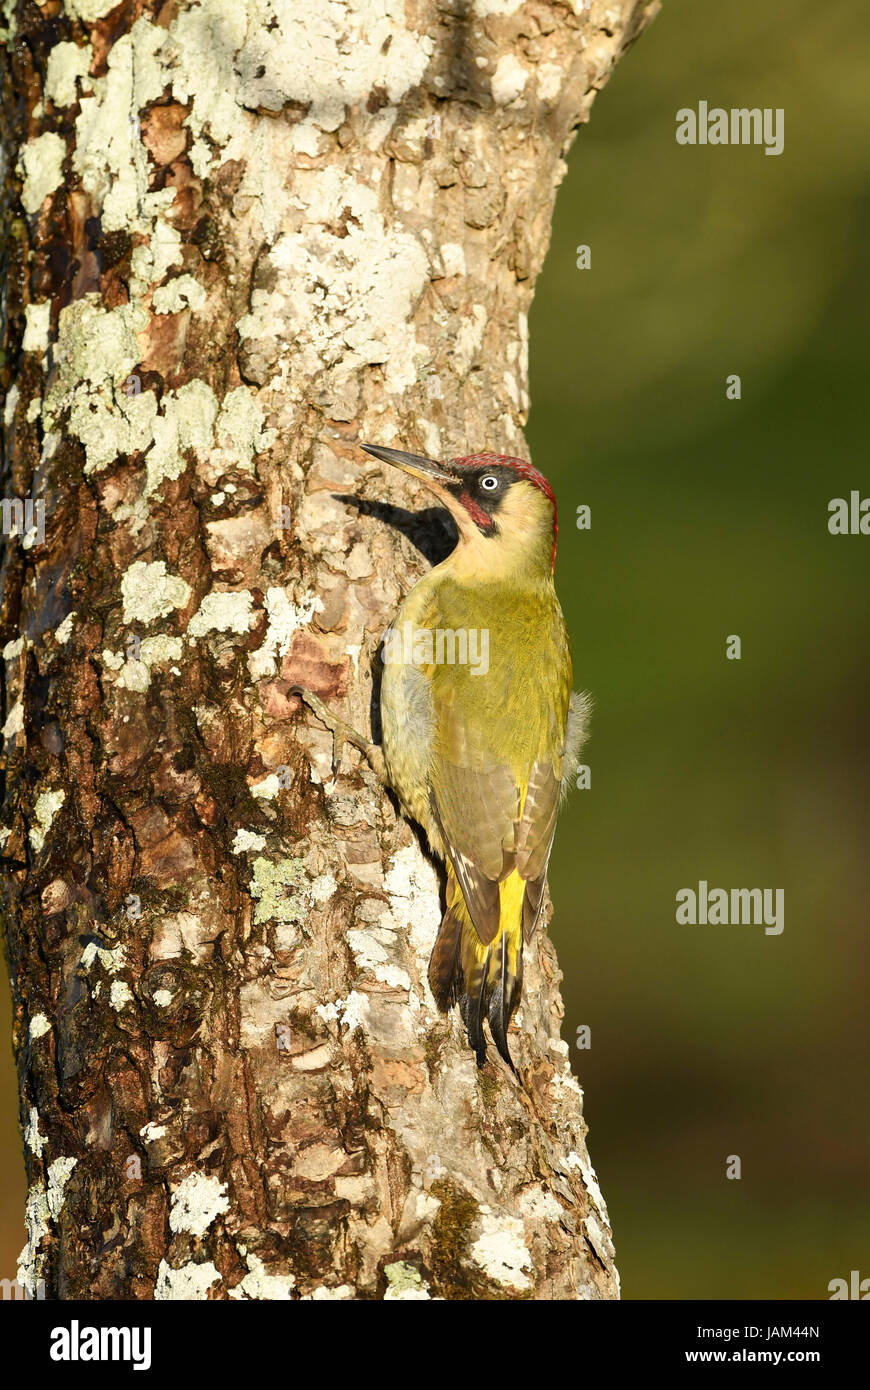 European Green Woodpecker (Picus viridis) adult male clinging to side of tree trunk, using tail as a brace, Gwent, Wales, November Stock Photo